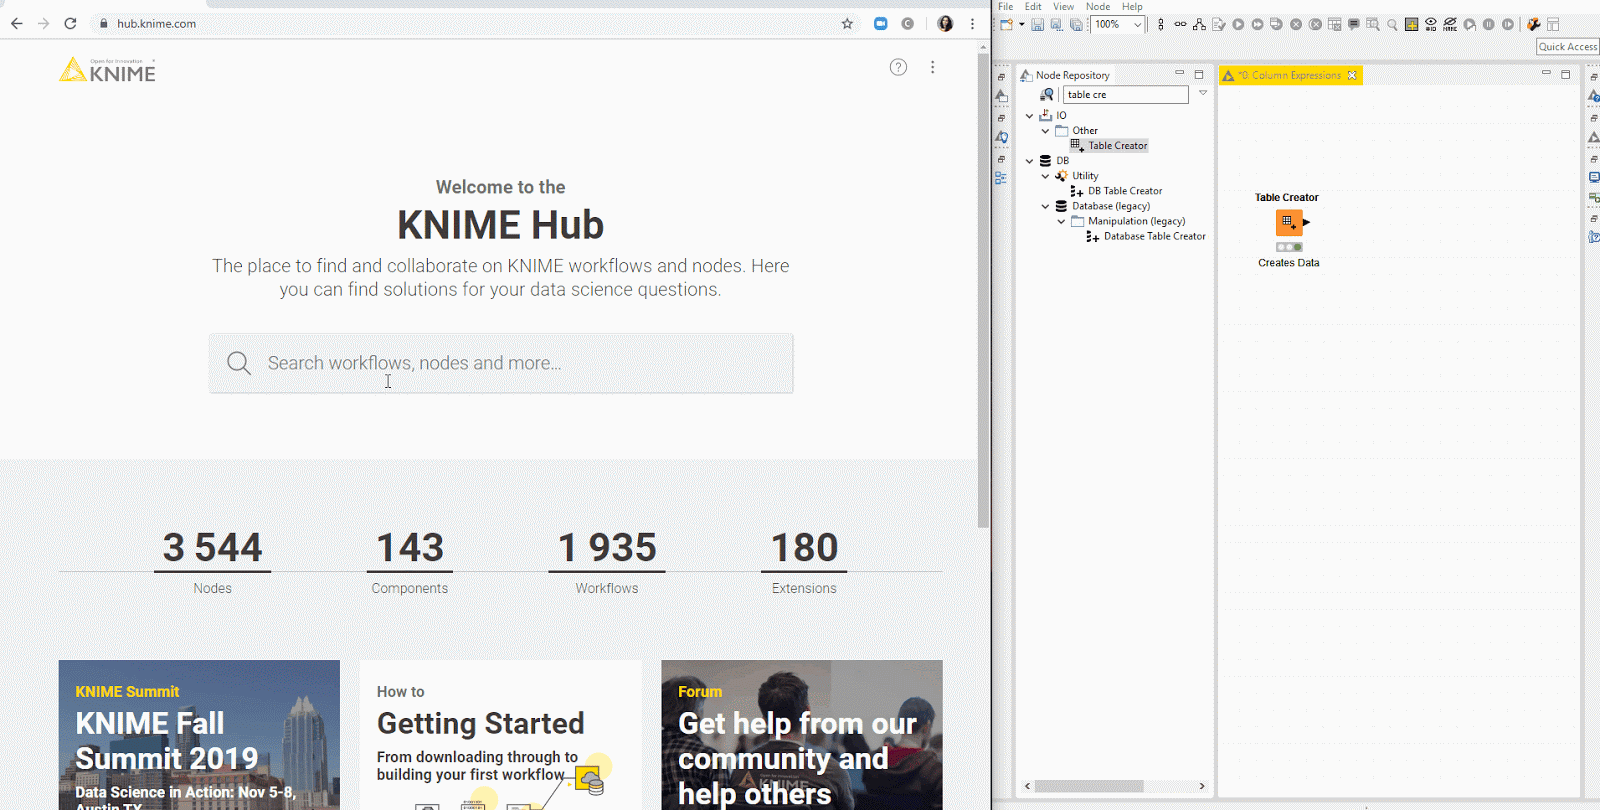 install-extensions-knime-hub.gif